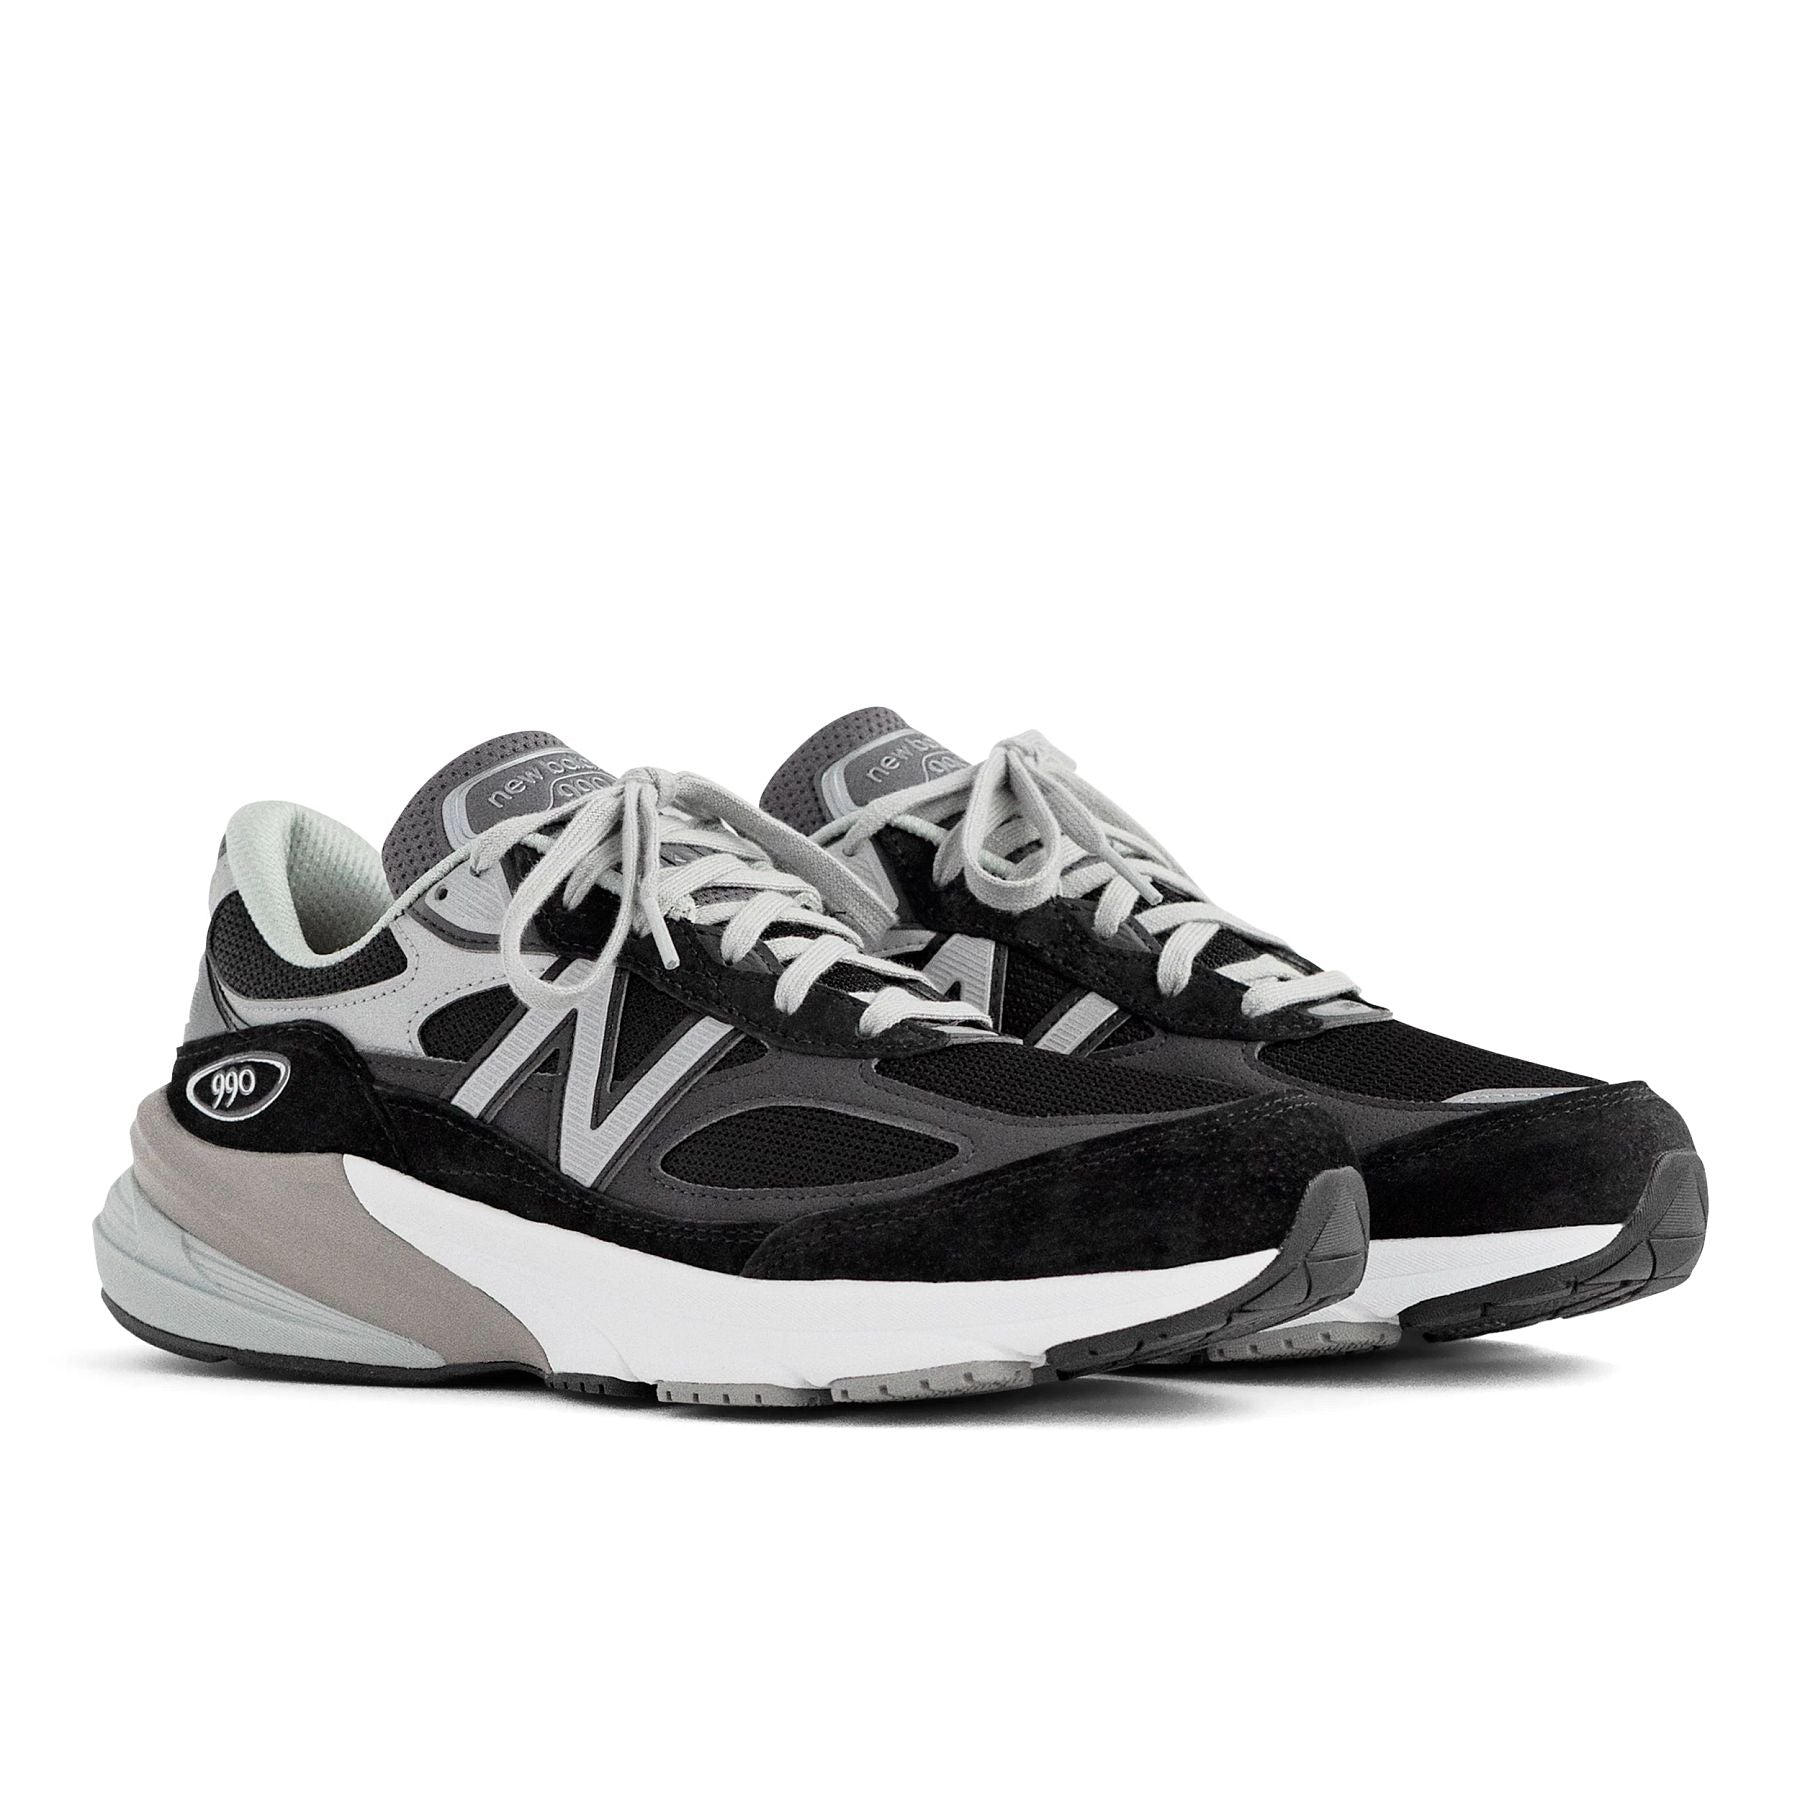 Front angle view of the Men's New Balance 990 V6 lifestyle shoe in Black/White